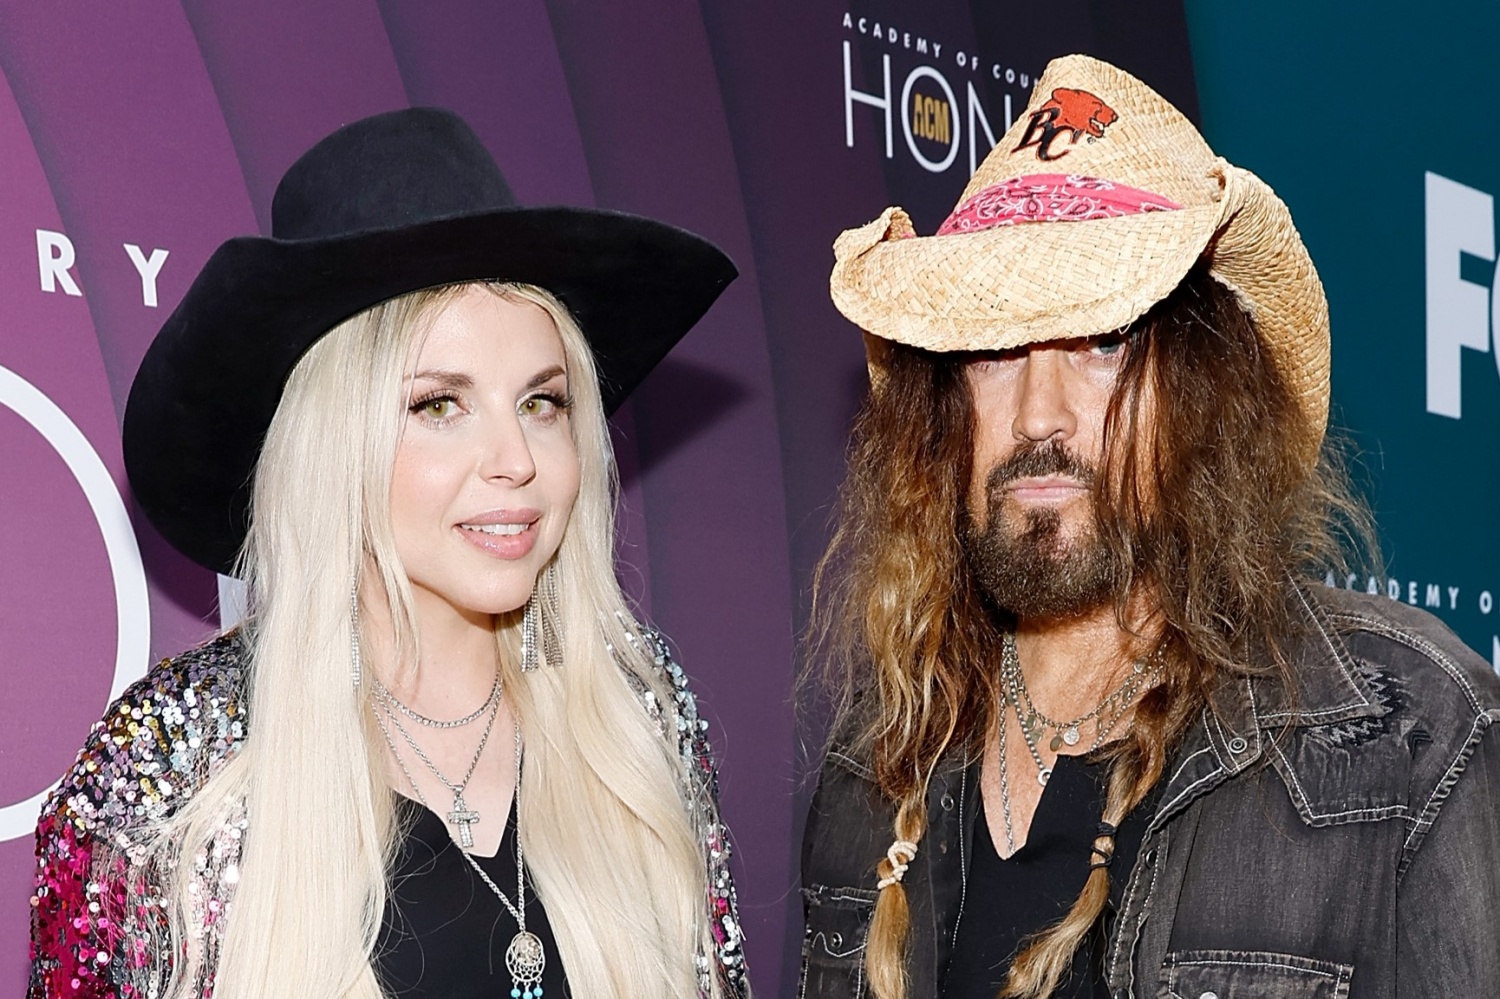 Billy Ray Cyrus divorced Firerose after 7 months of marriage because of ‘fraud’, ‘kicked’ his wife out of the house